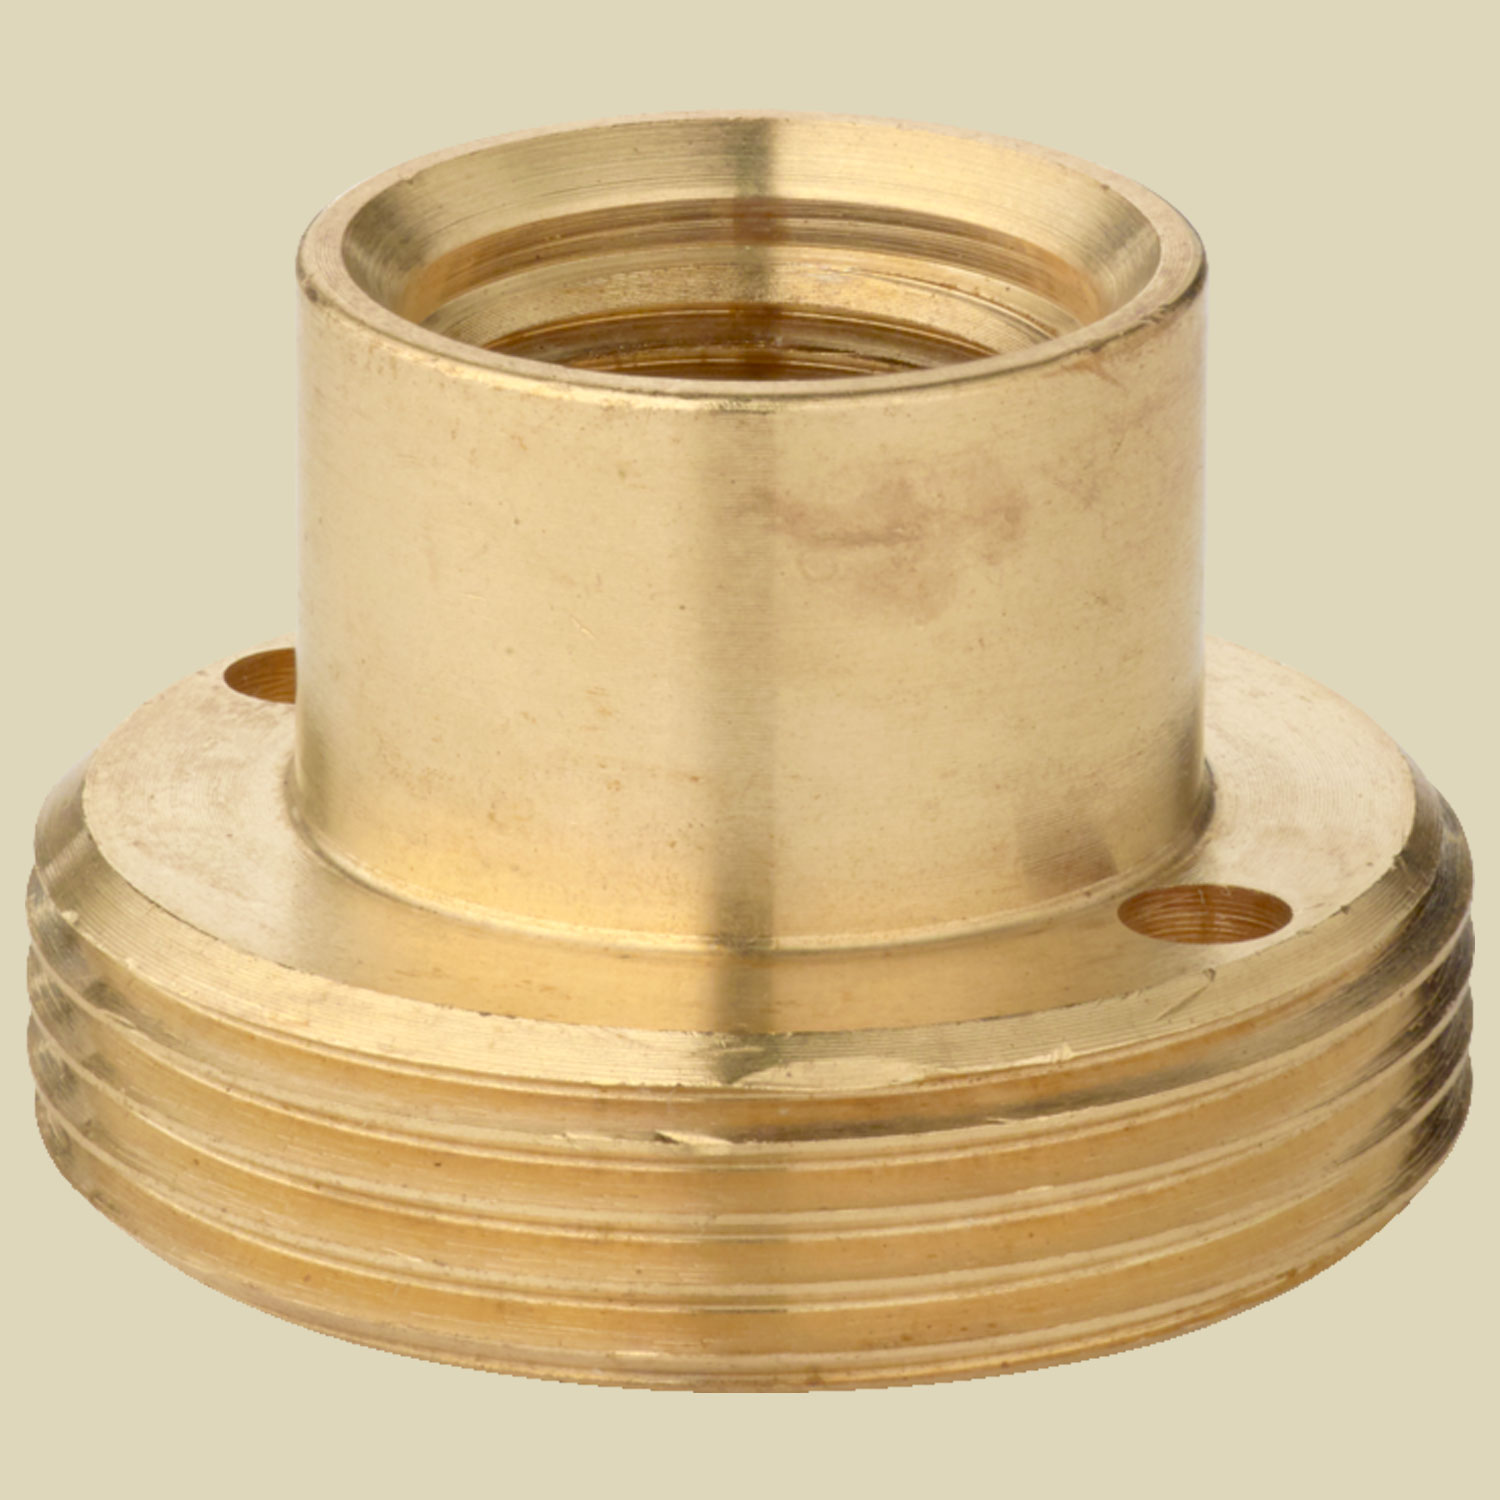 Lindal Valve Adapter für 3501/4400 (2202/2206/2207 canisters)